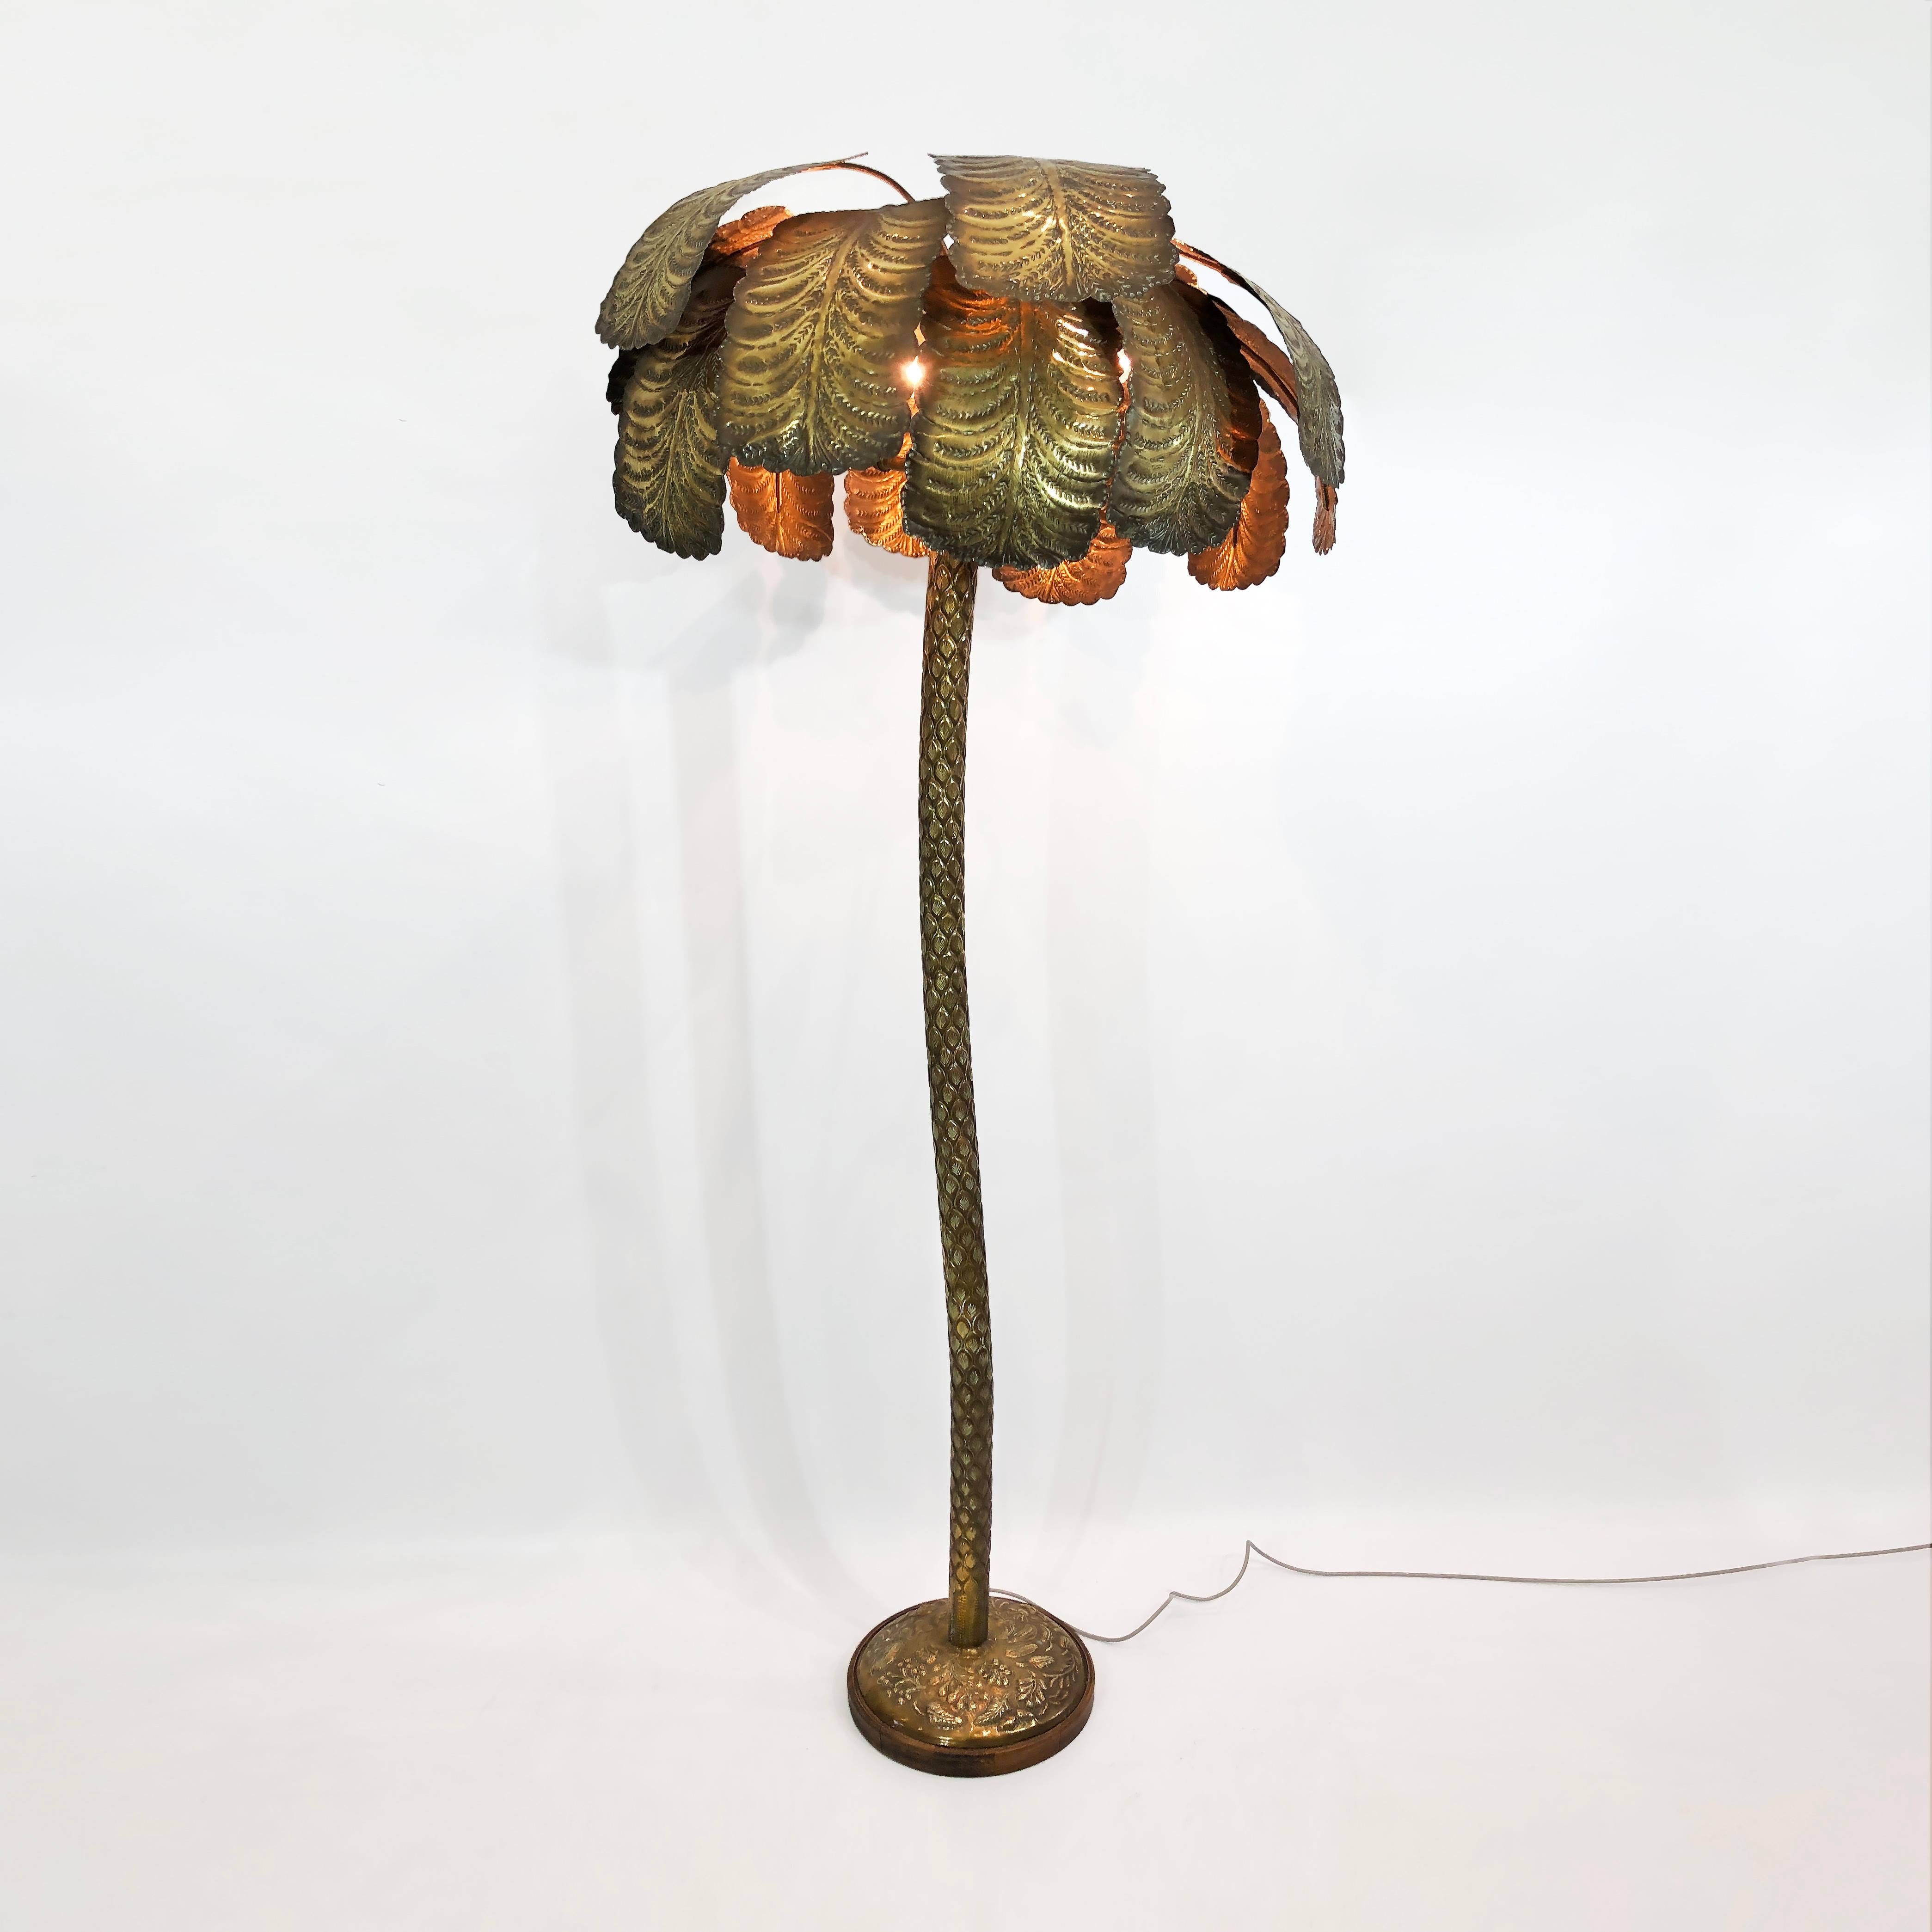 This extravagant brass palm tree floor lamp, imported from Spain, is a stunning and highly rare example of design at the meeting point of brutalism and Hollywood Regency opulence. Originally part of a Spanish estate in the 1970s - which is easily